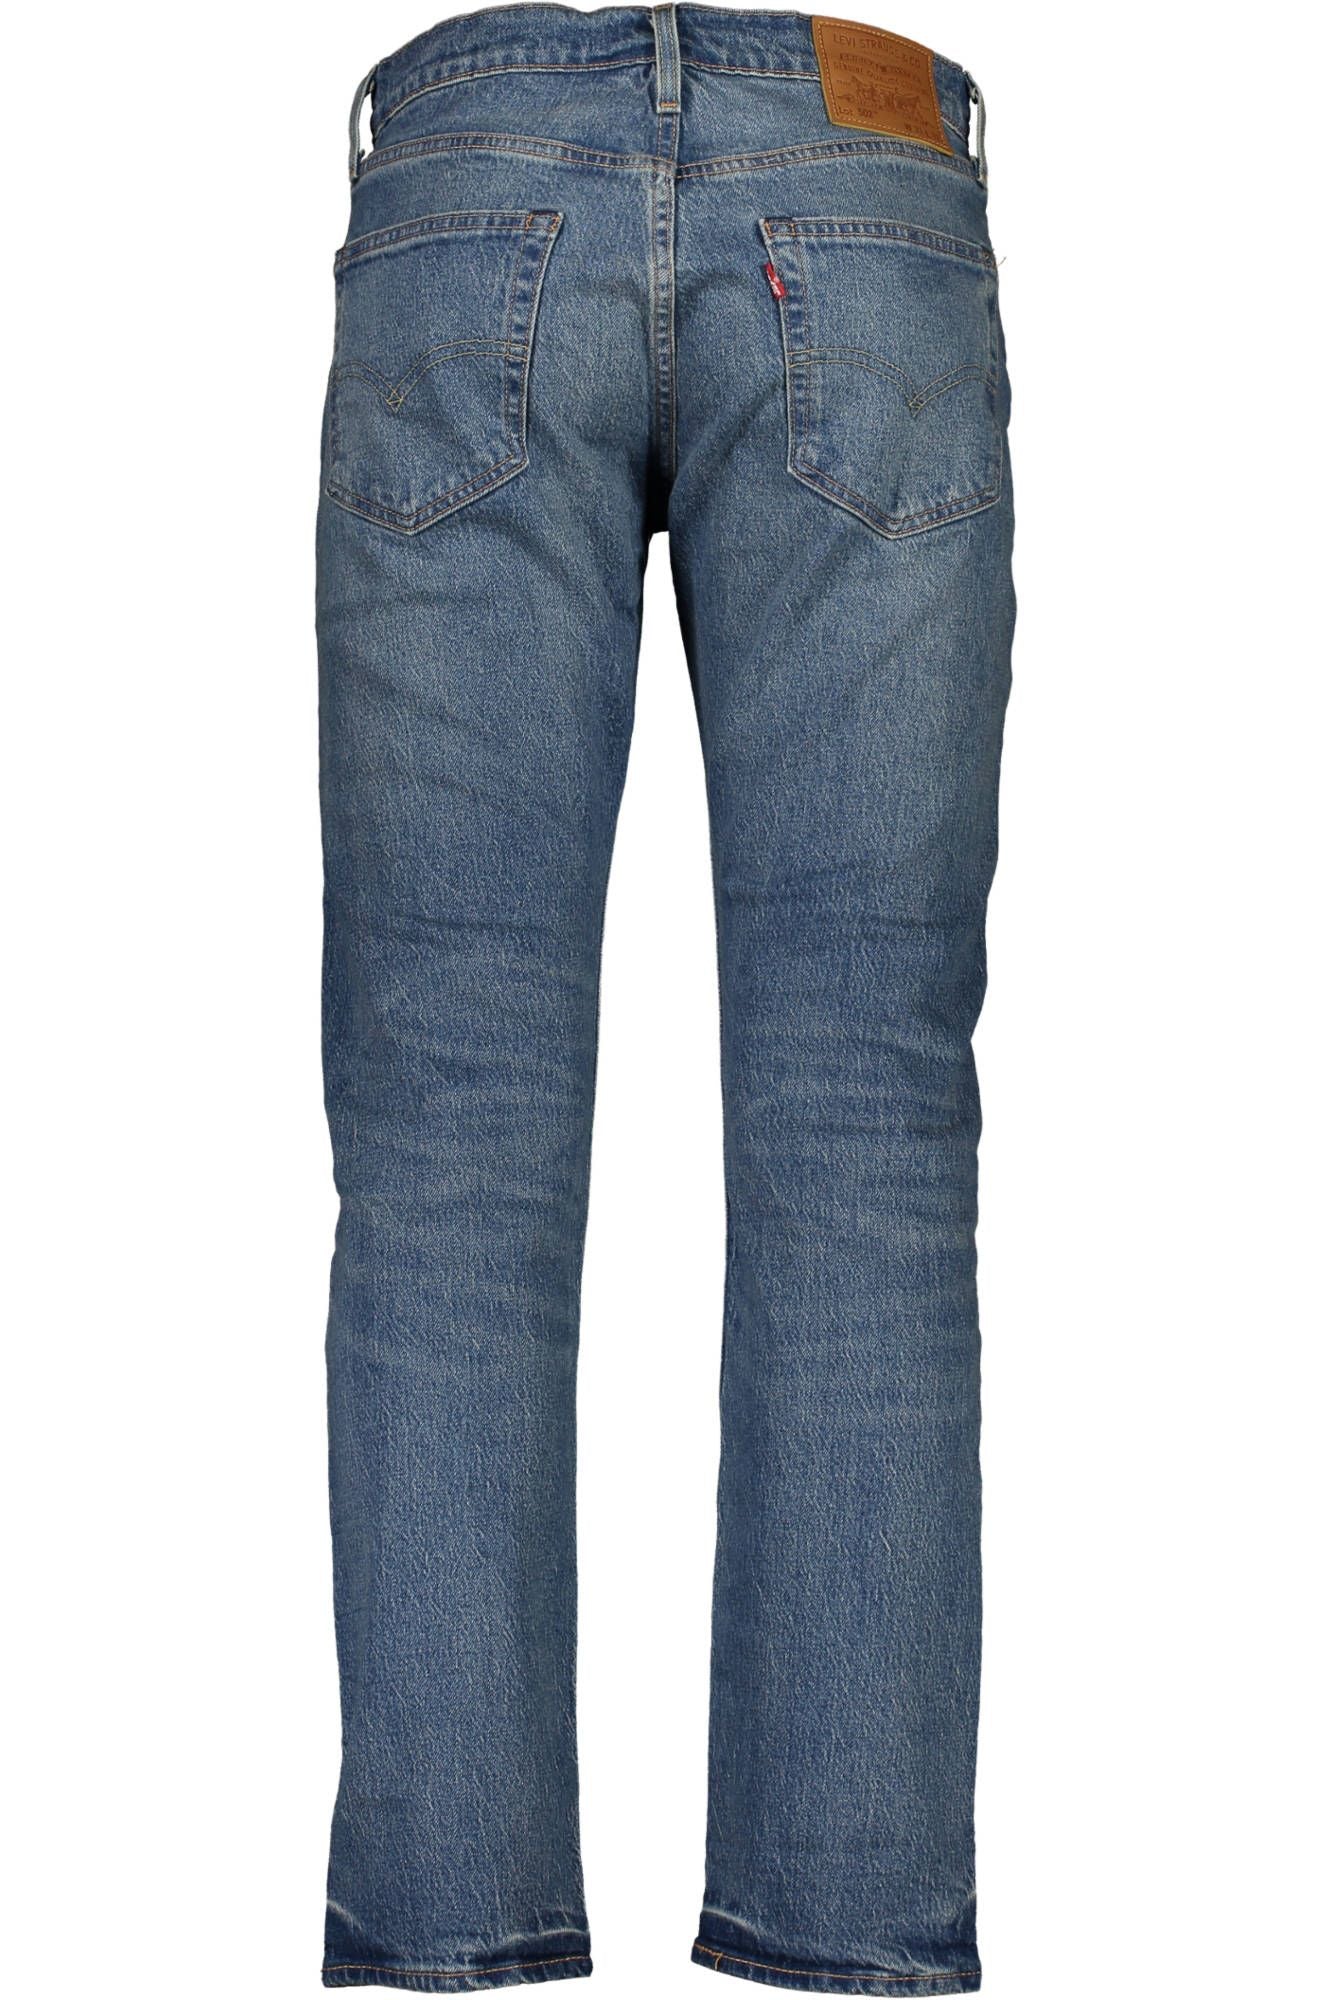 Levi's – Zeitlose, Tapered-Fit-Jeans in Blau